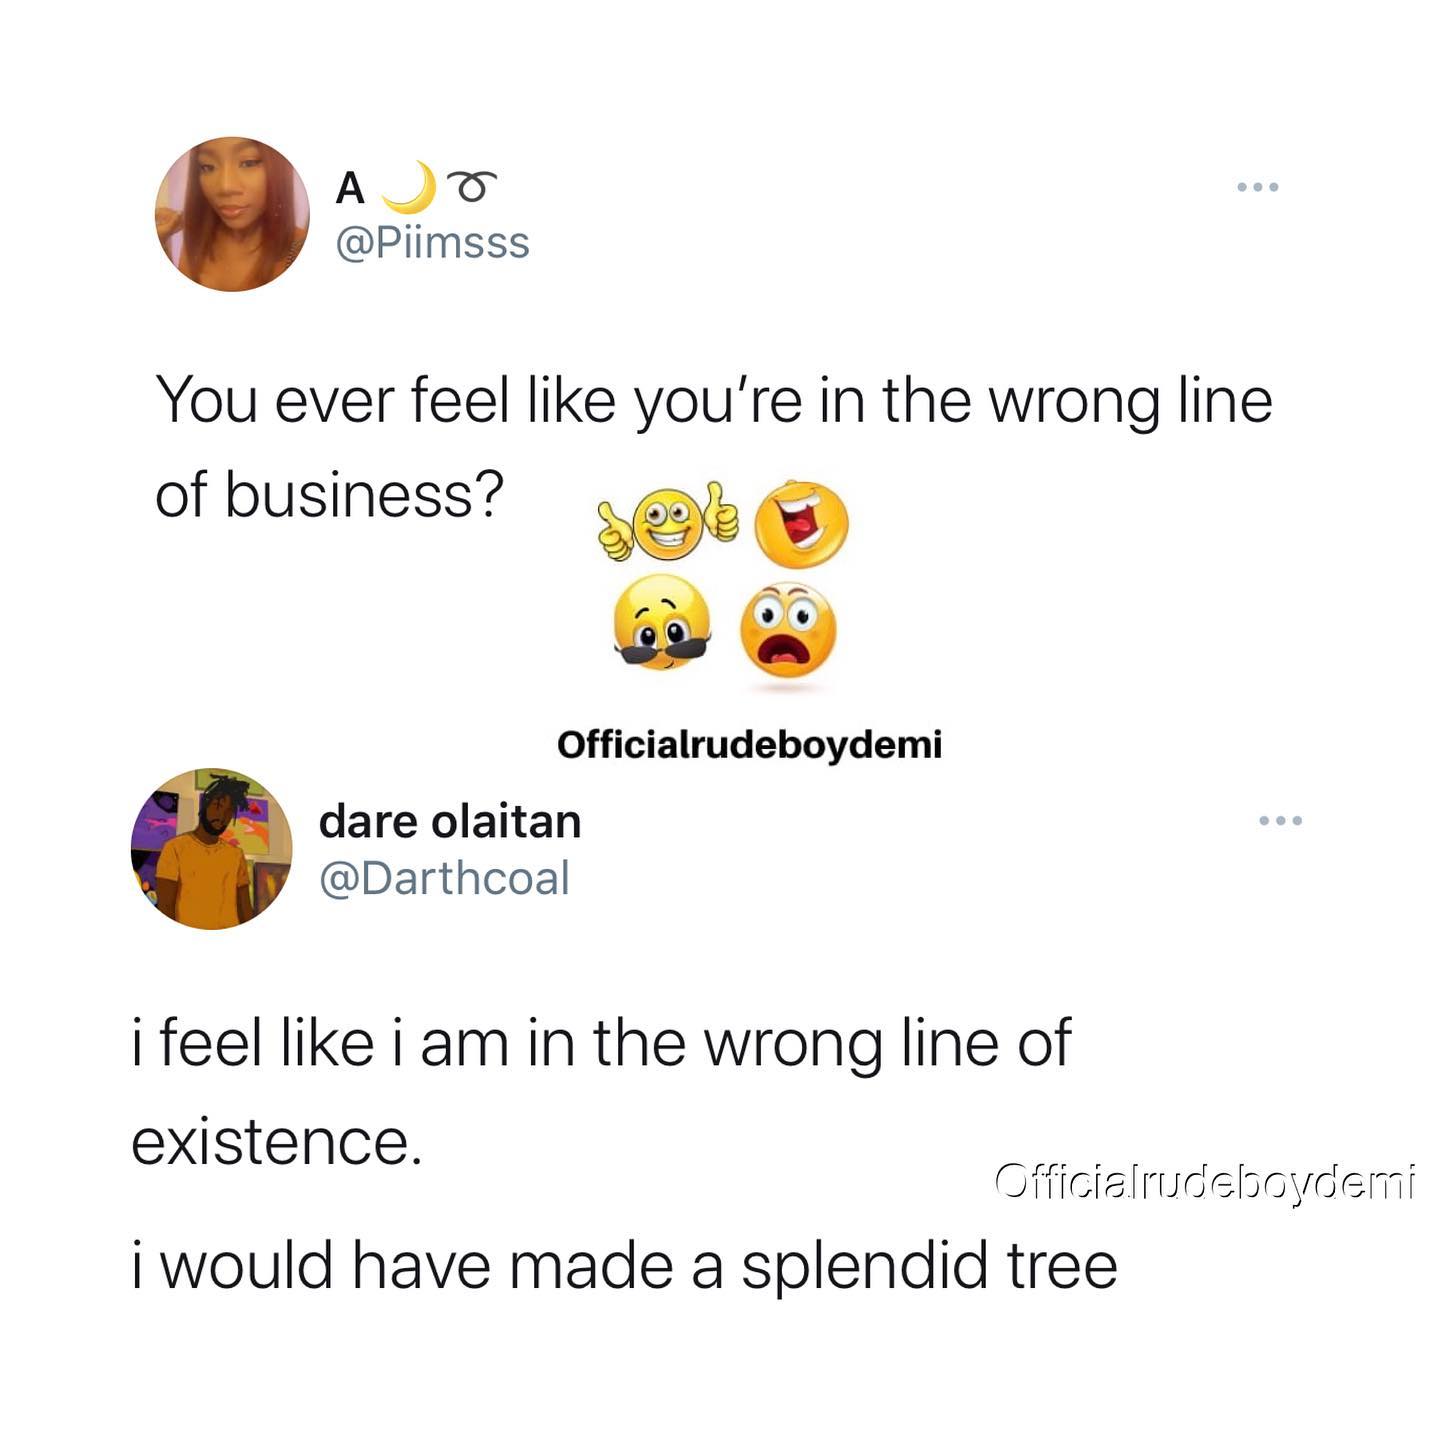 emoticon - A 0 You ever feel you're in the wrong line of business? deels Officialrudeboydemi dare olaitan i feel i am in the wrong line of existence. Officialrudeboydemi i would have made a splendid tree